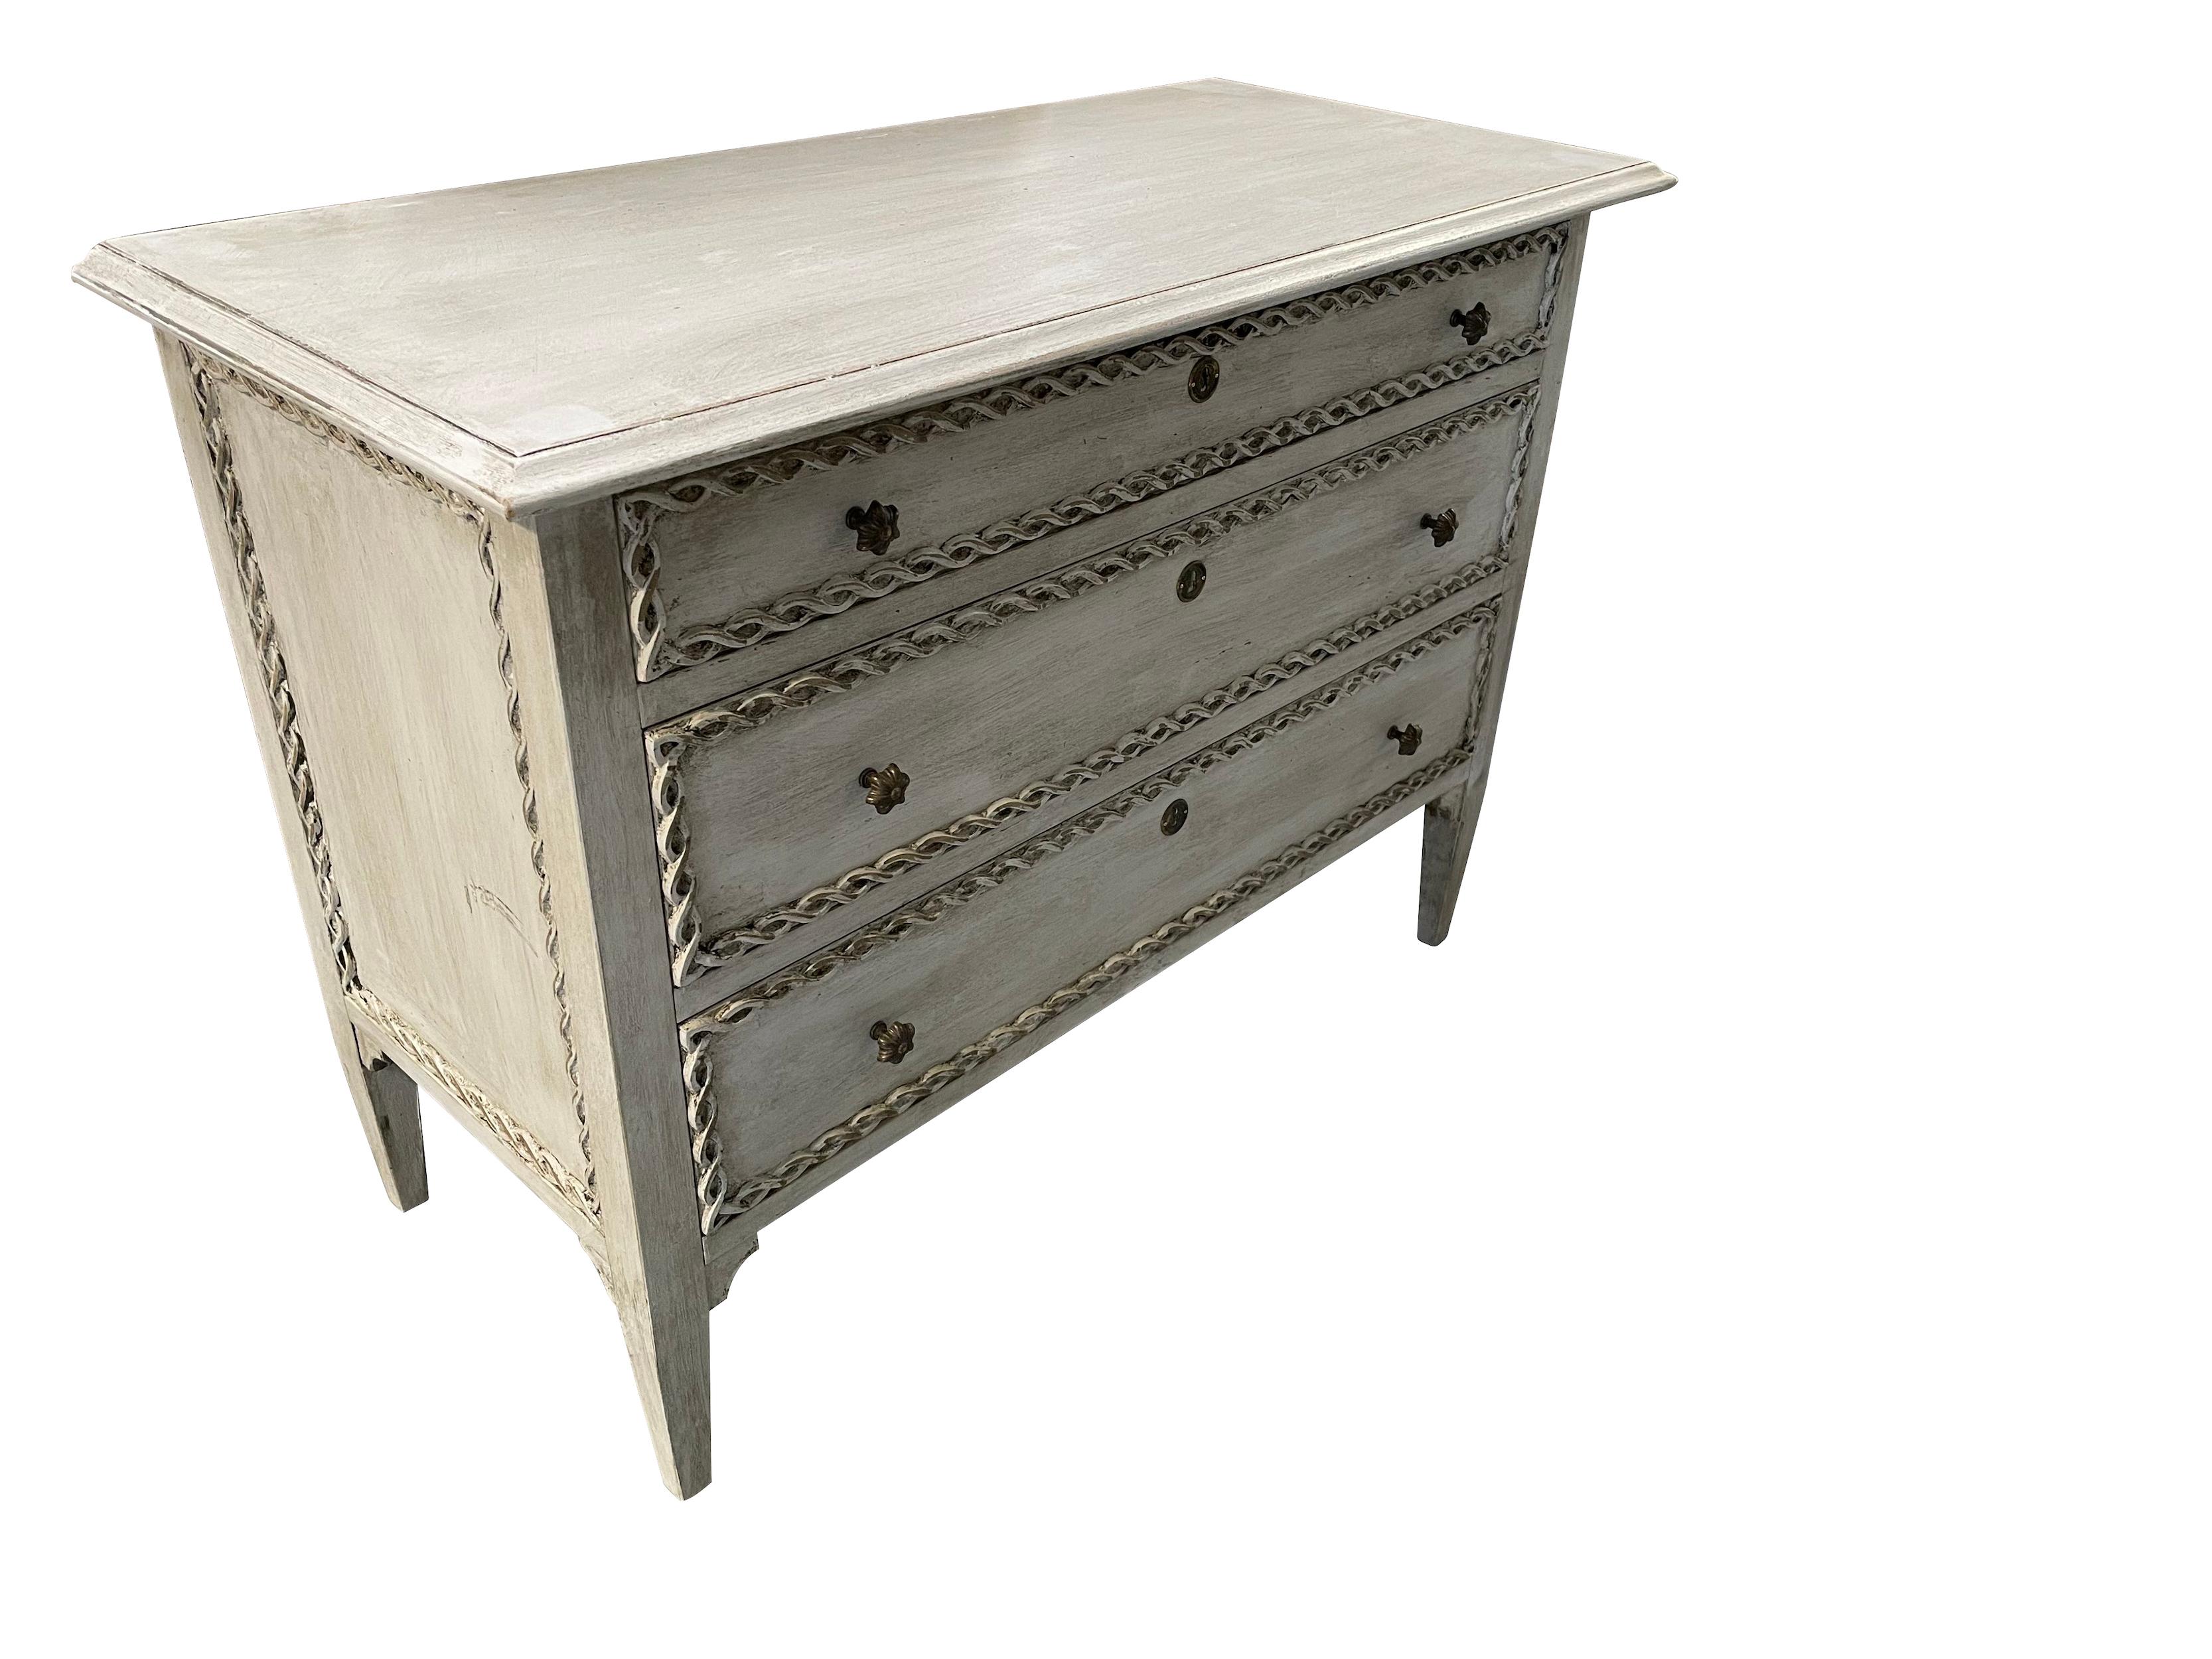 Contemporary Italian three drawer commode.
Decorative washed painted finish.
Carved trellis detailing.
Antique bronze knobs.
